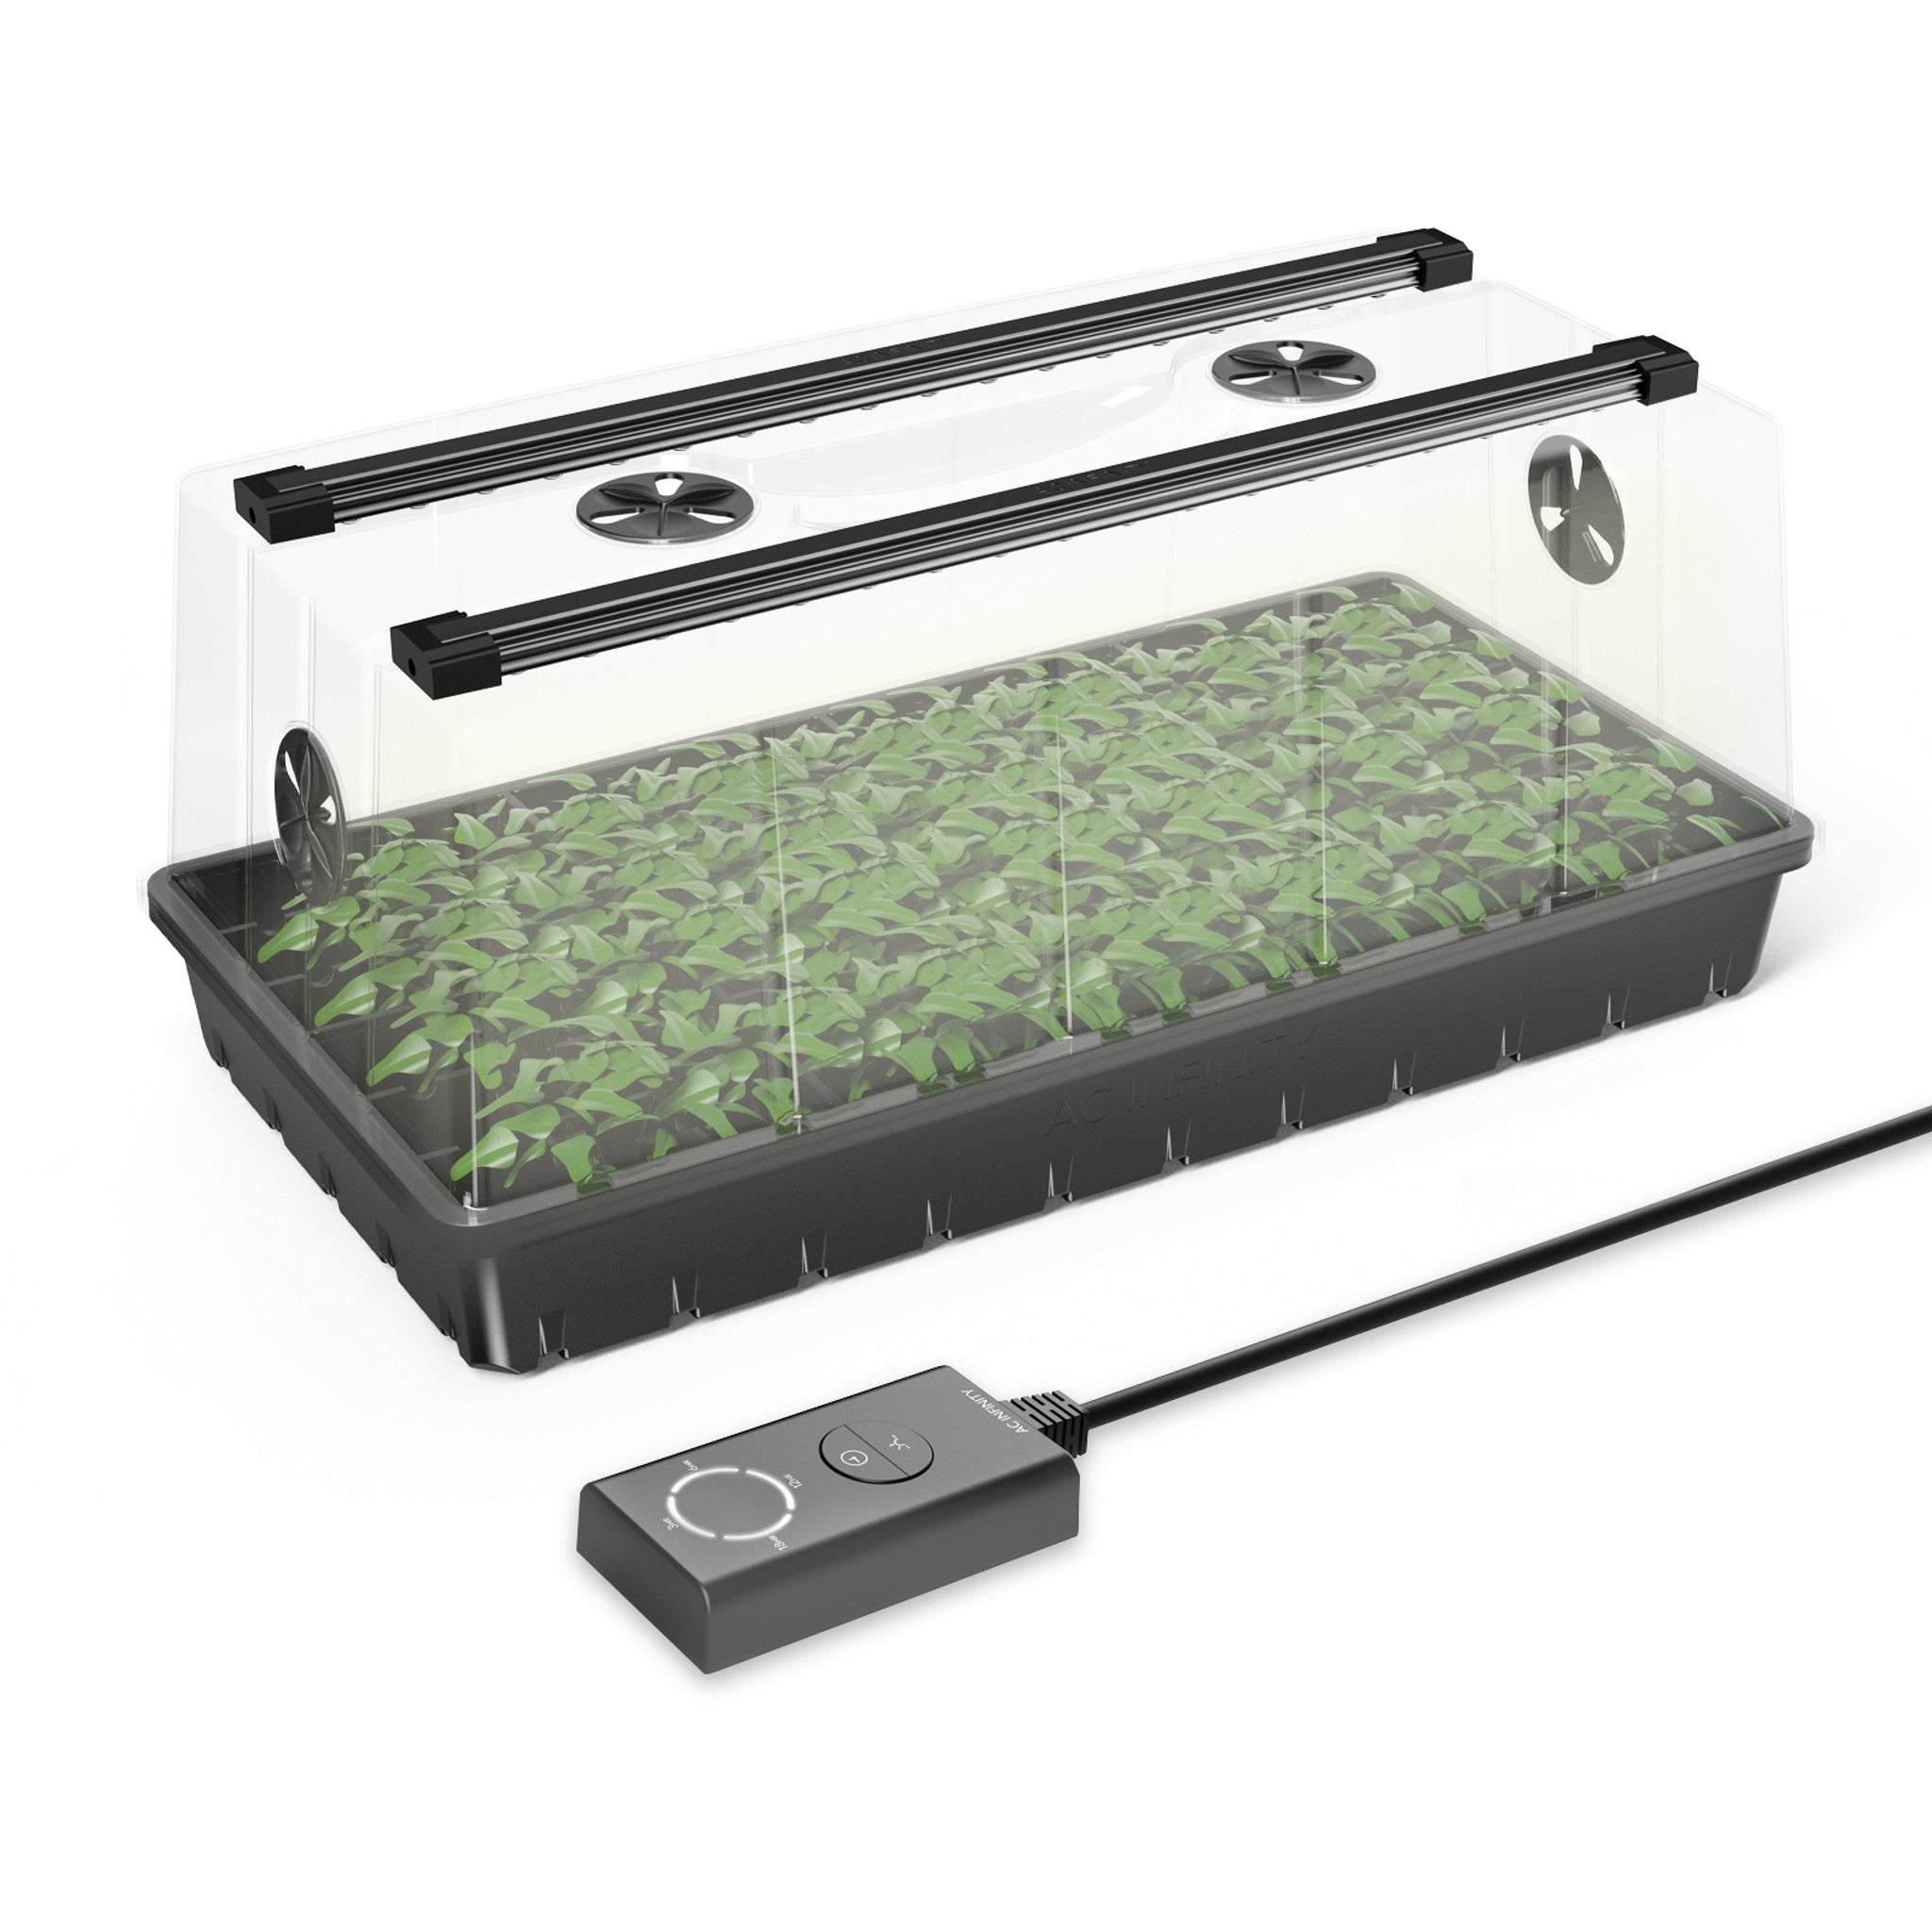 HUMIDITY DOME, GERMINATION KIT WITH LED GROW LIGHT BARS, 6X12 CELL TRAY